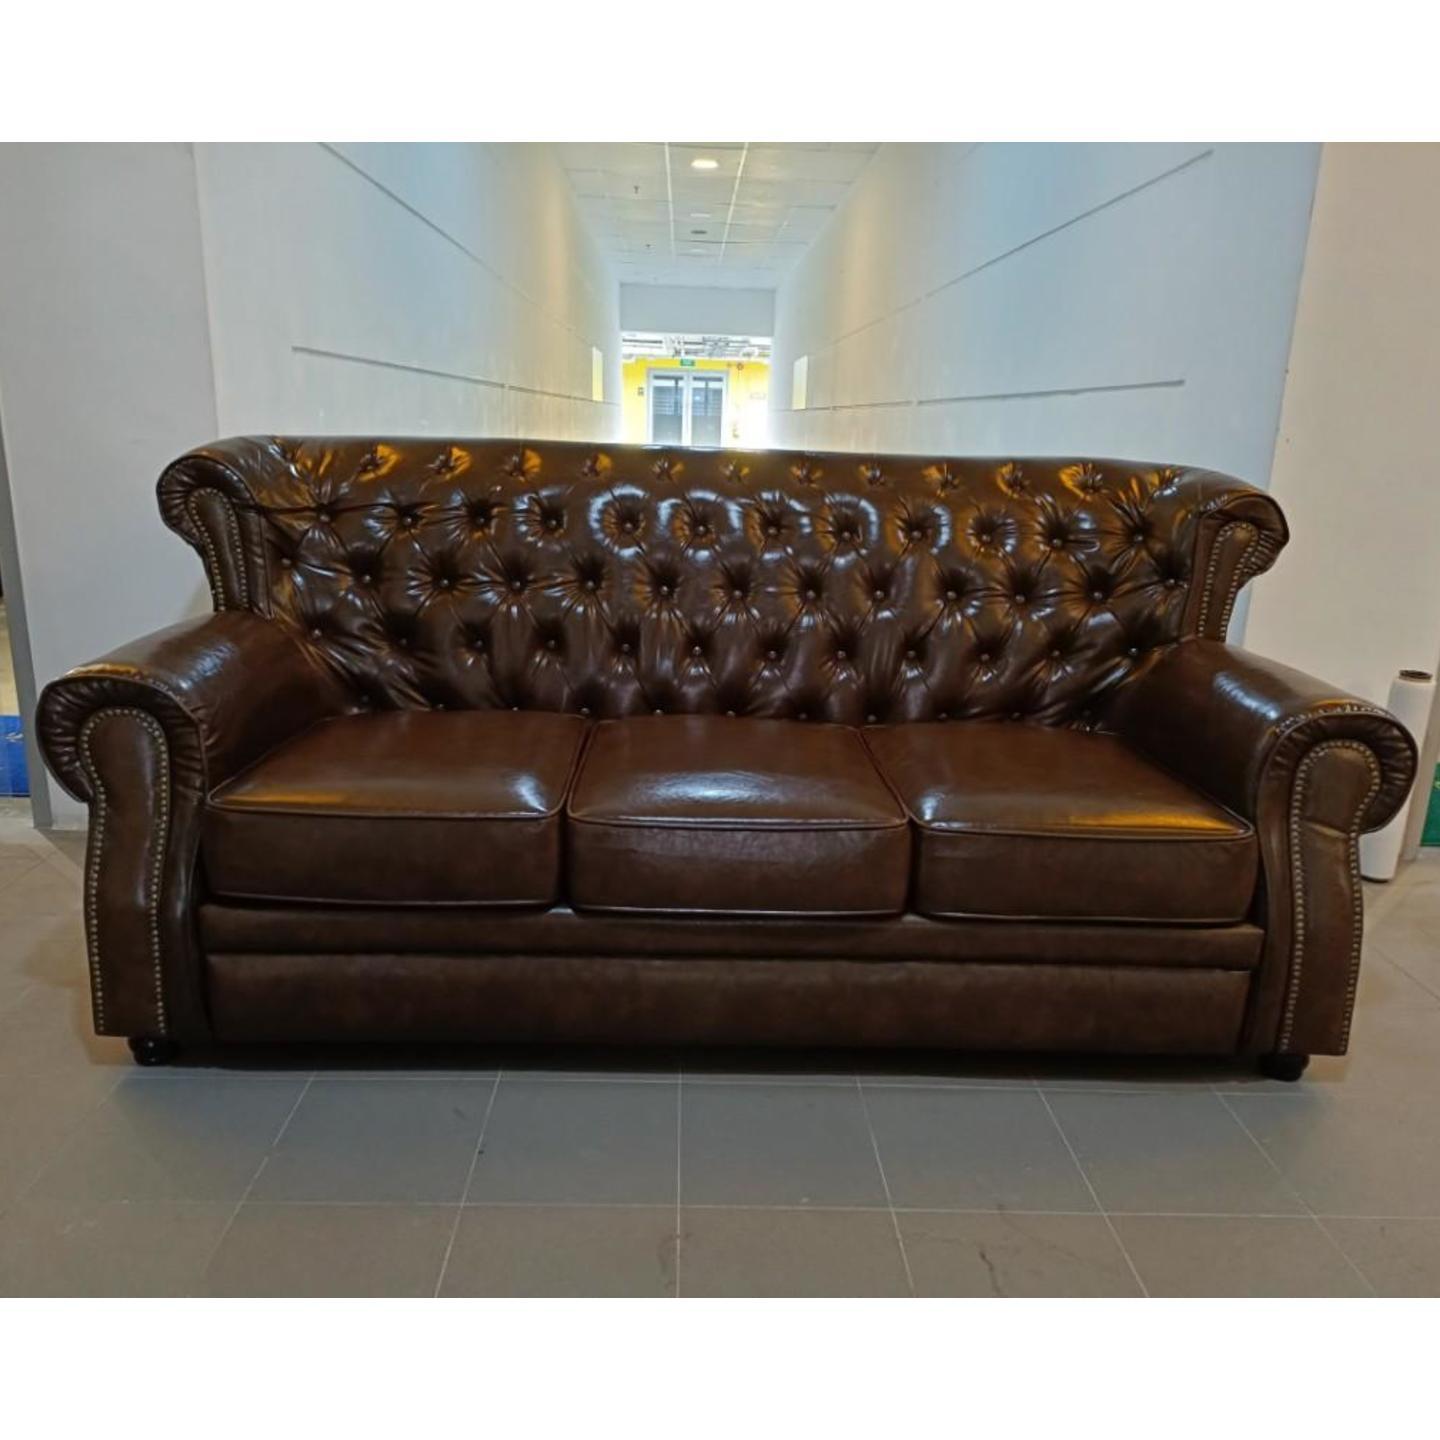 CLIVEREN 3 Seater Chesterfield High Back Sofa in DARK COCO BROWN PU